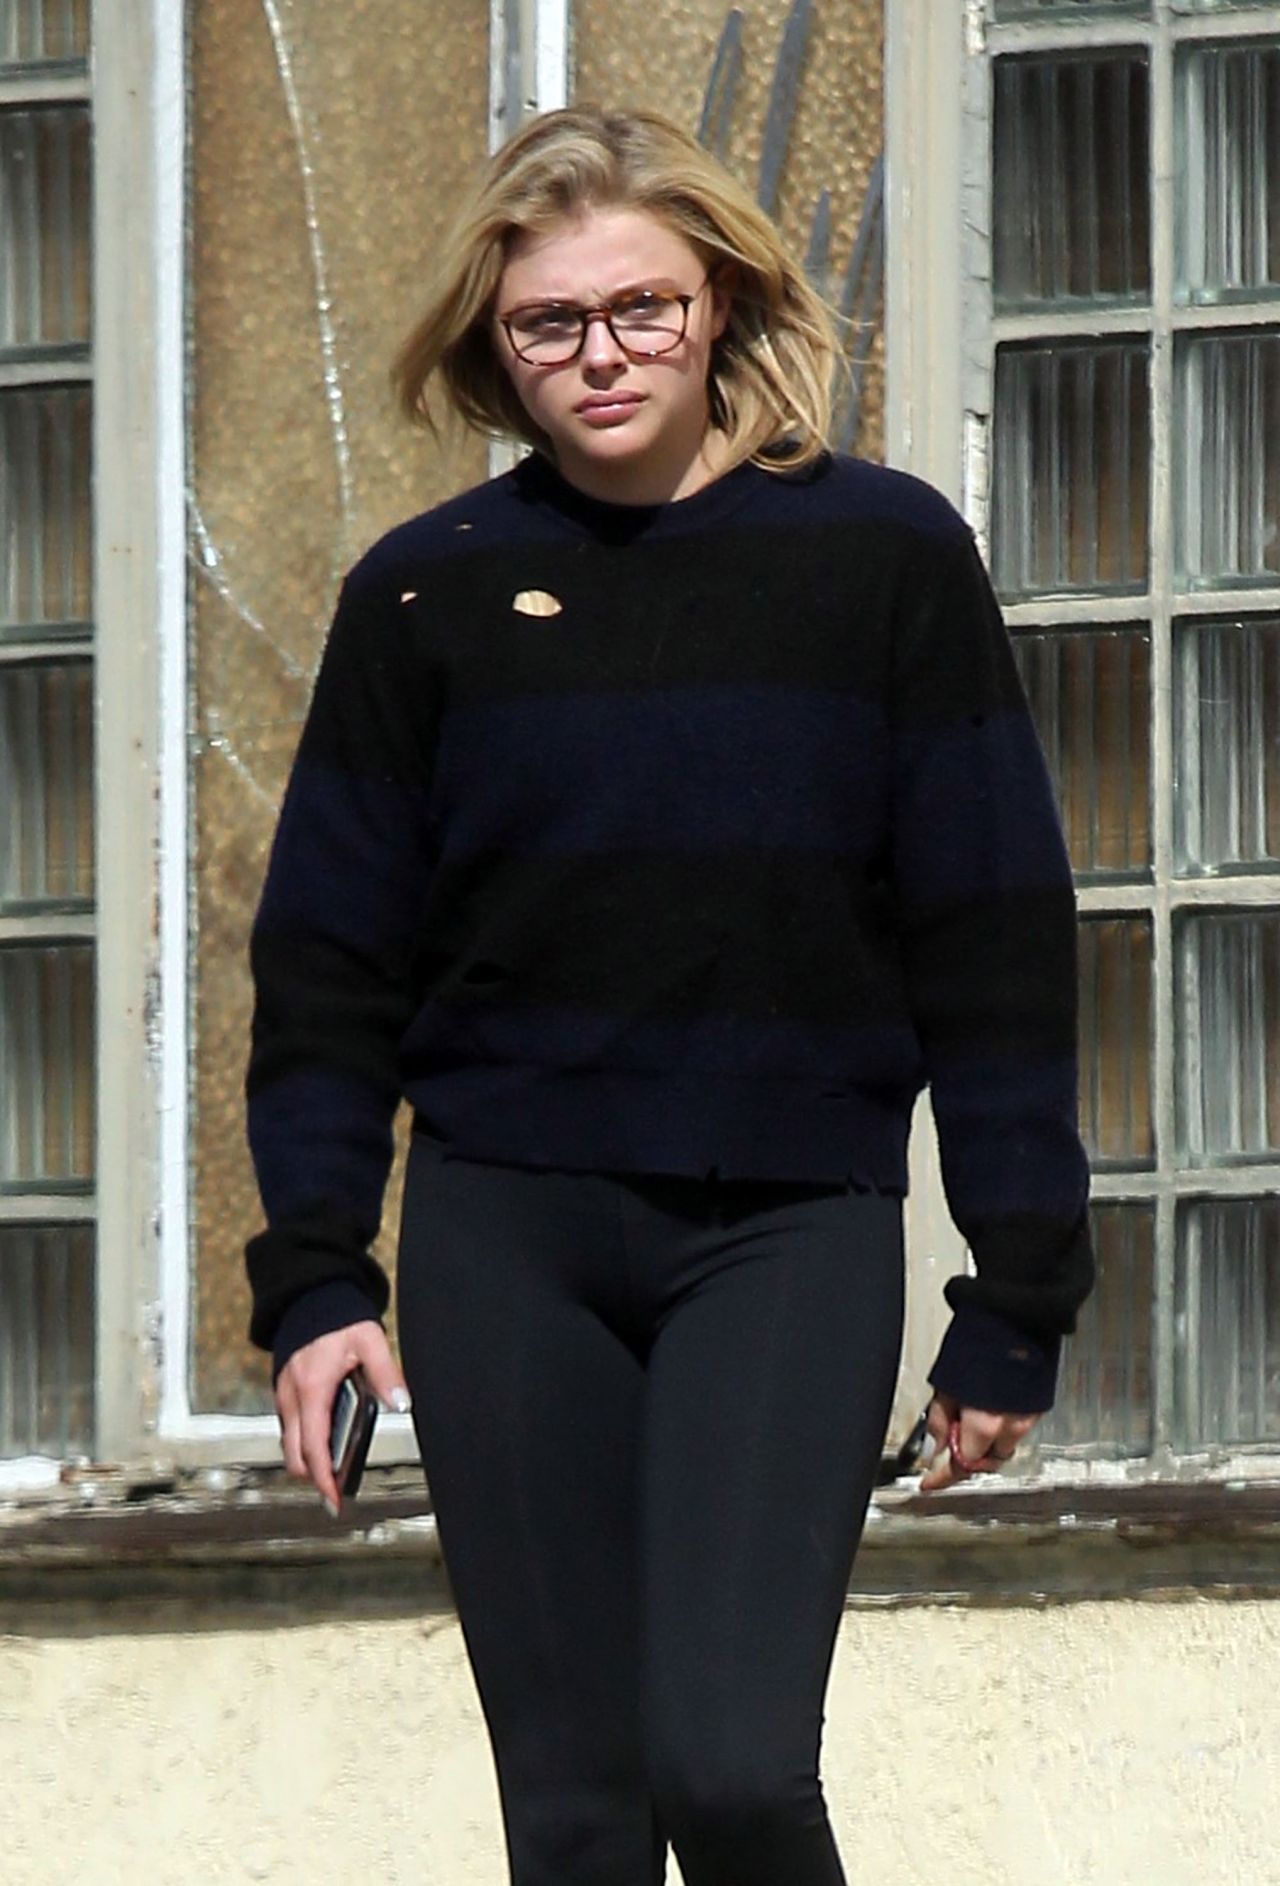 Chloe Grace Moretz's sports glasses as she steps out for a